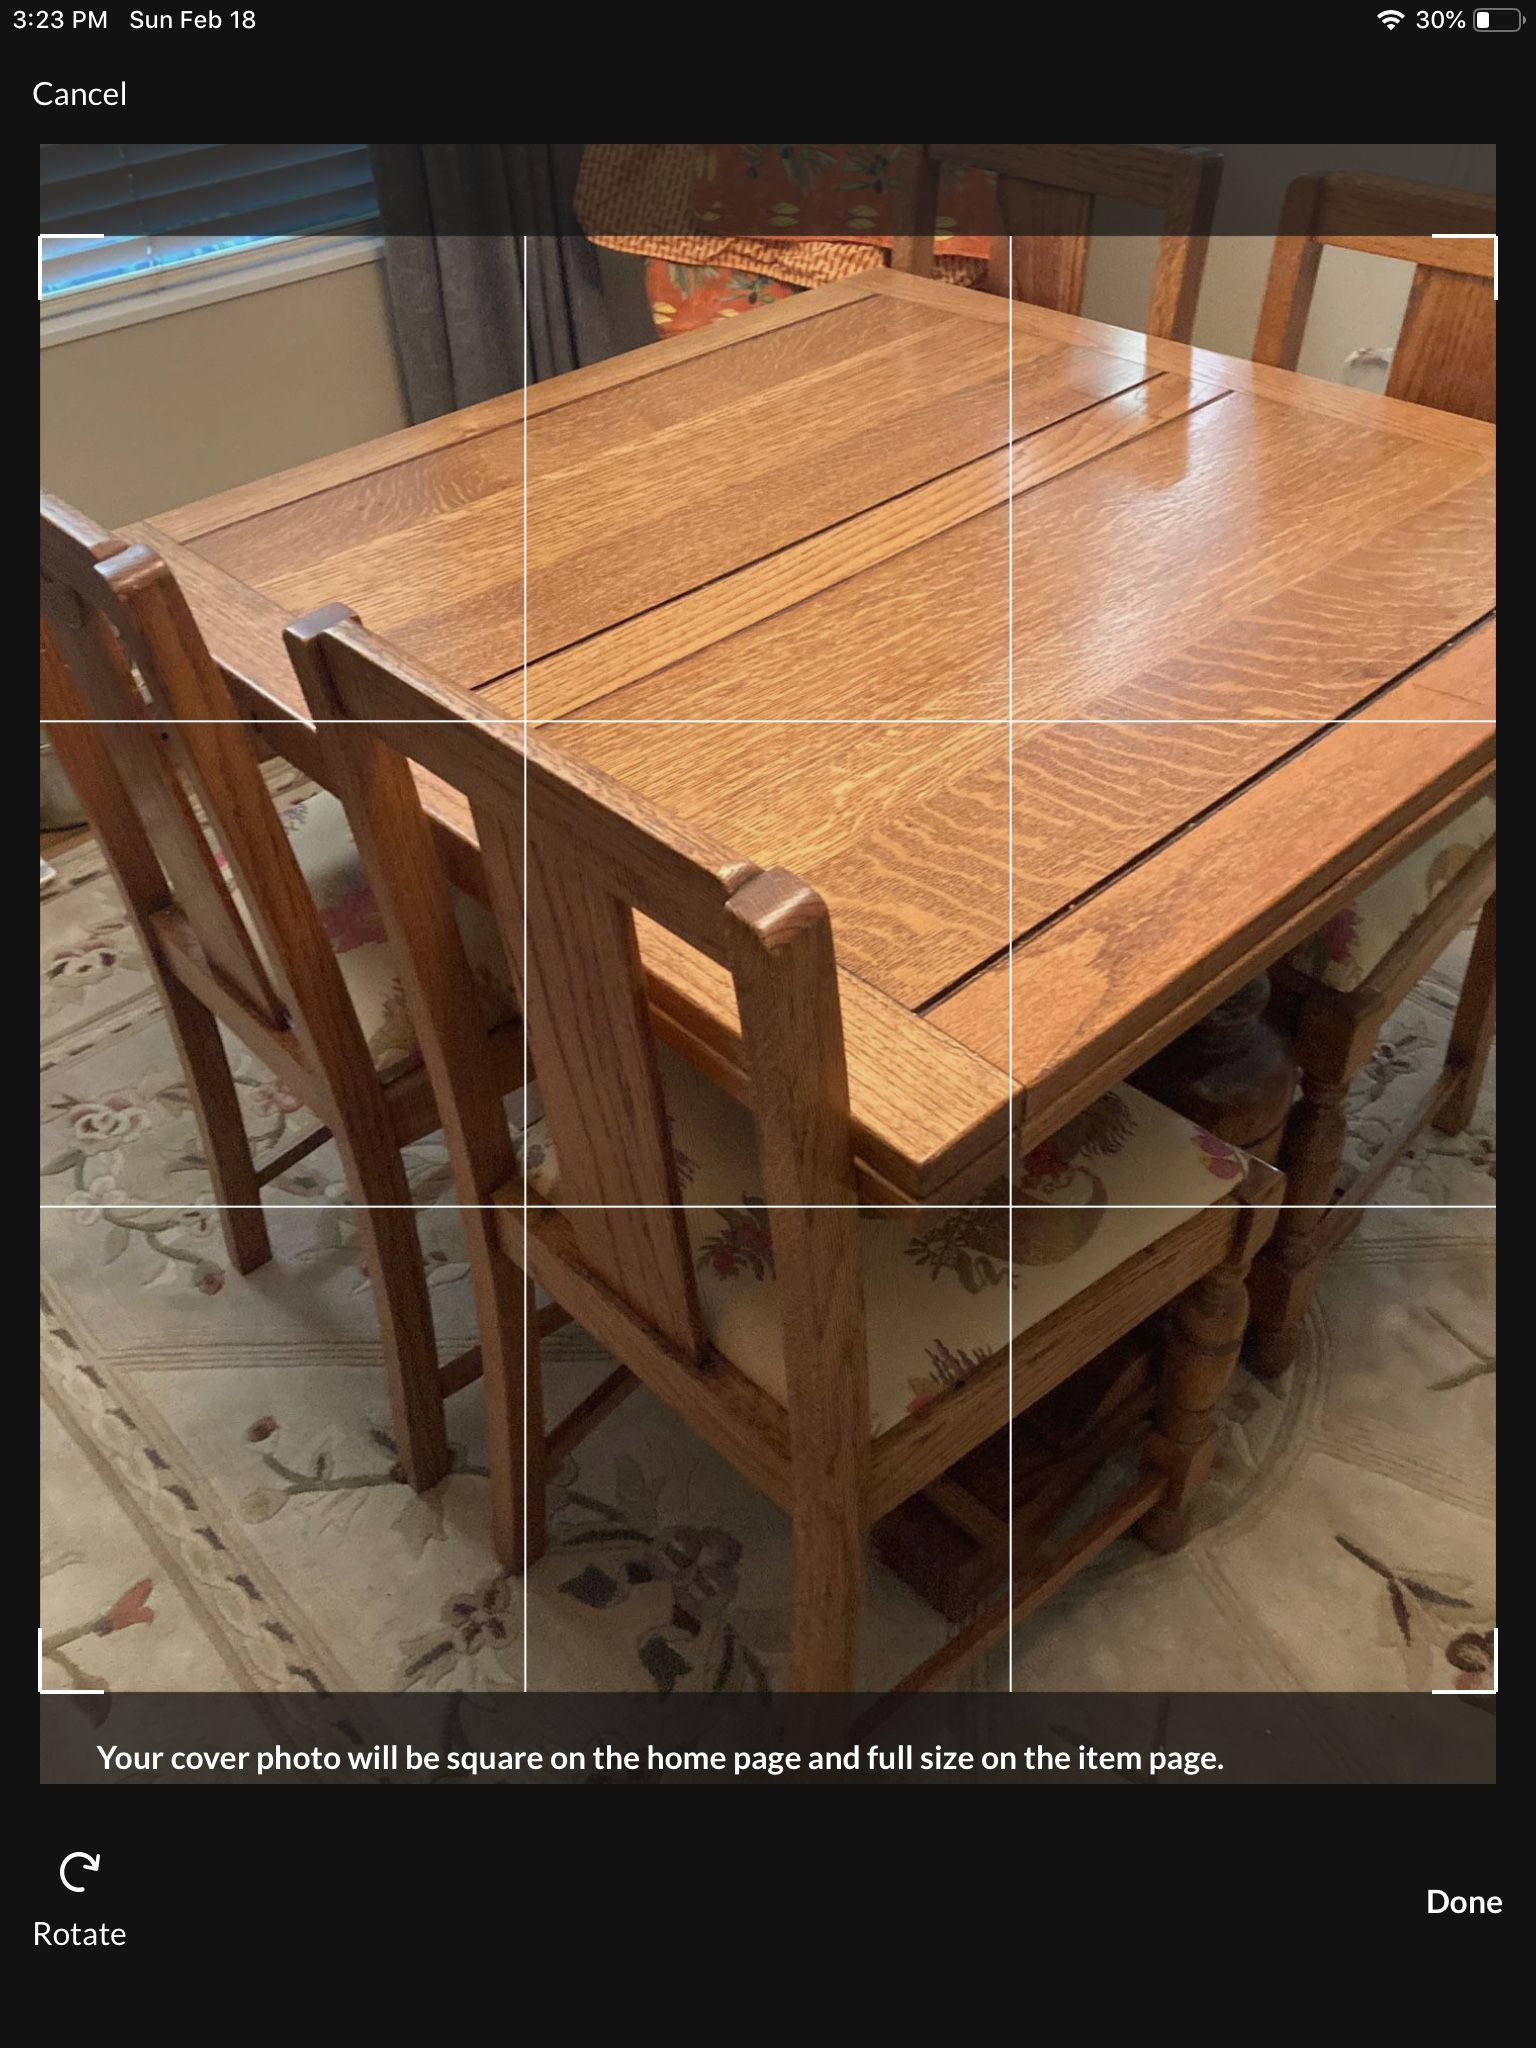 Farmhouse Oak Table With Hidden Leafs - Vintage - Great For Small Dining Or Kitchen